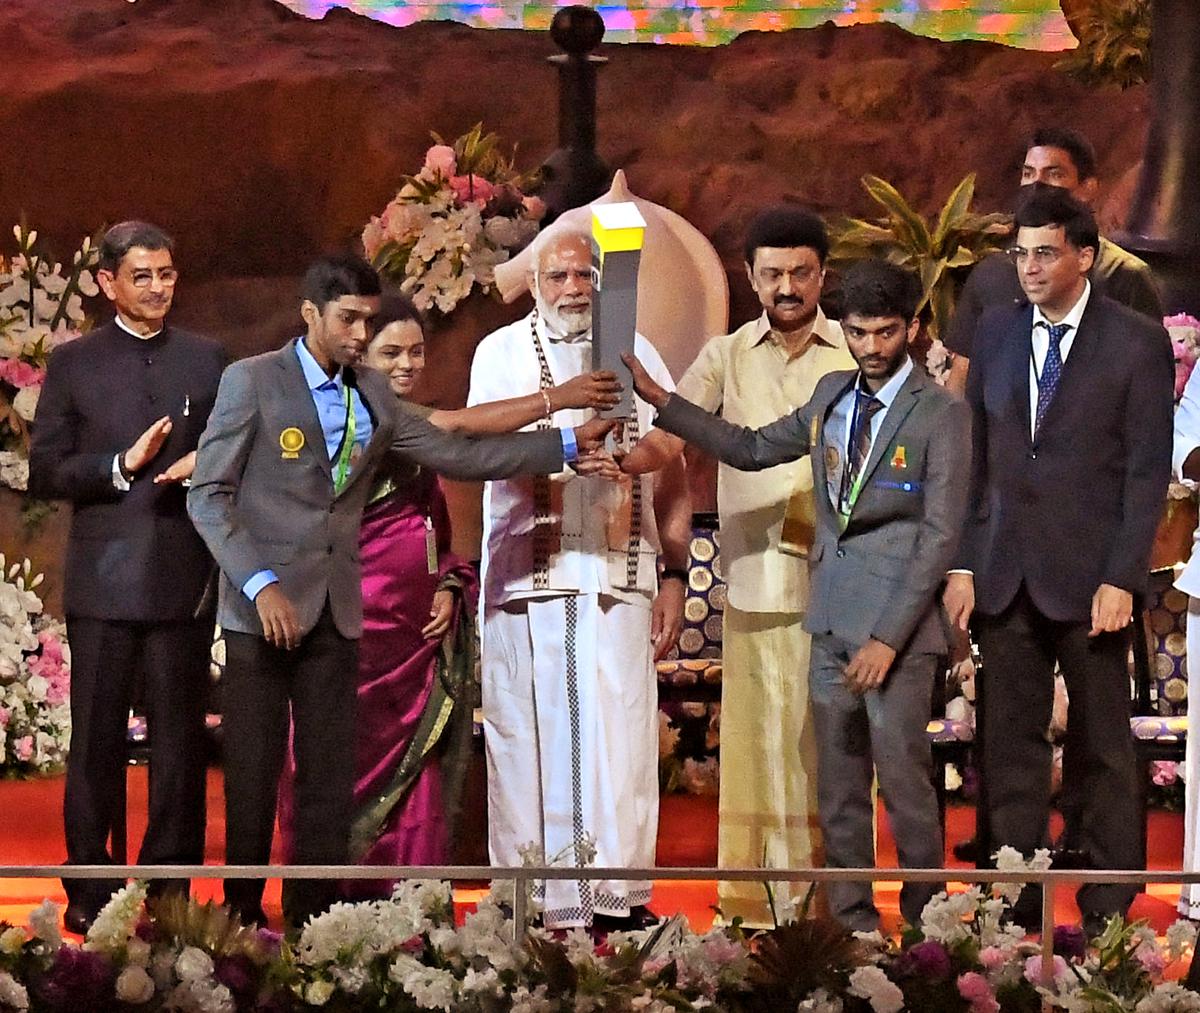 Prime Minister Narendra Modi was seen holding the Chess Olympiad torch along with Tamil Nadu President CM MK Stalin and former Grandmaster Viswanathan Anand at the 44th FIDE Chess Olympiad.  Also in the frame is R. Pragnanandhaa, s.  Vijayalakshmi, D Gukesh - All Grandmasters at the opening ceremony of the Chess Olympiad at Nehru Indoor Stadium, Chennai on 28 July 2022. 